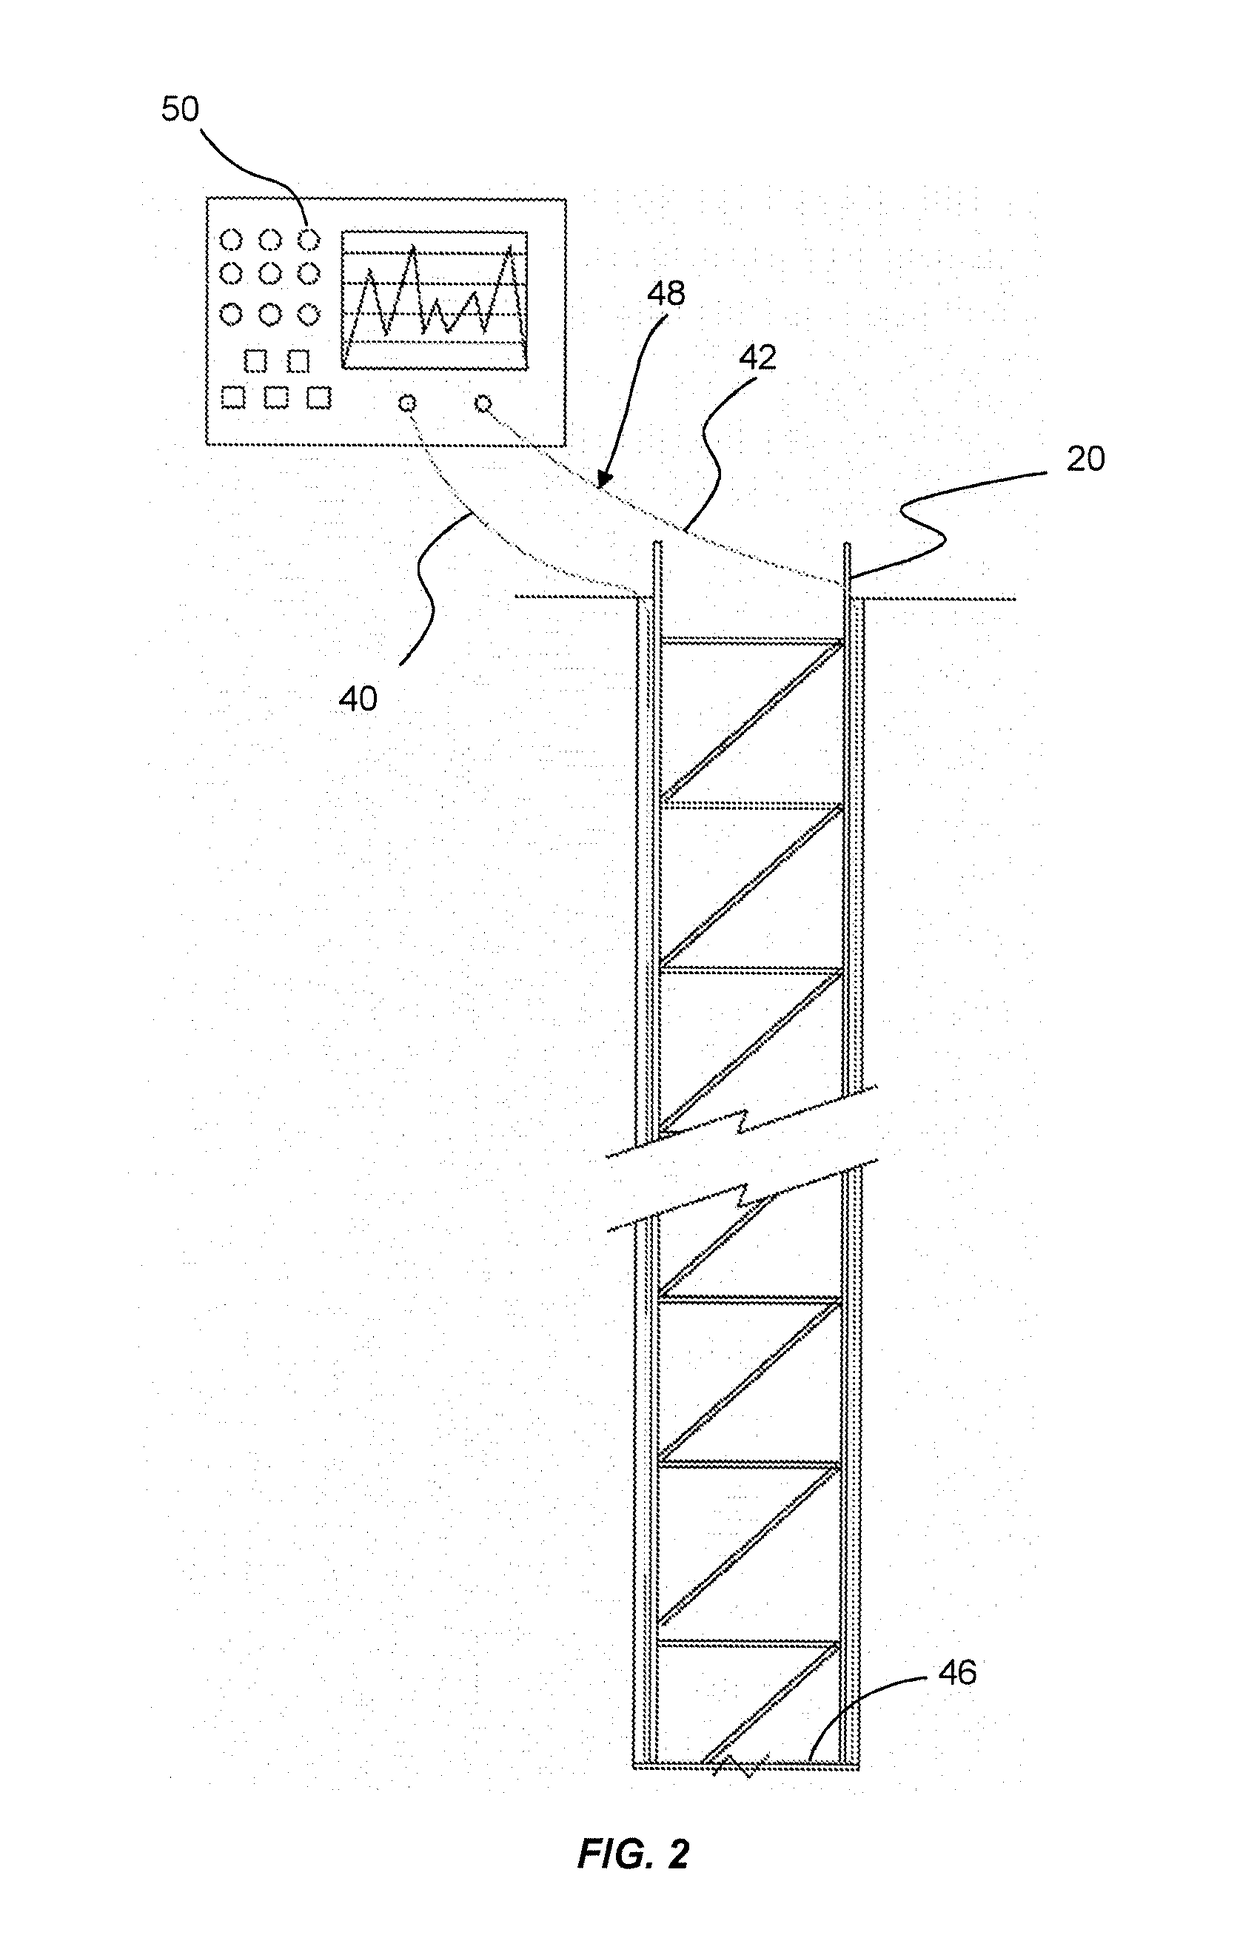 Method of monitoring subsurface concrete structures